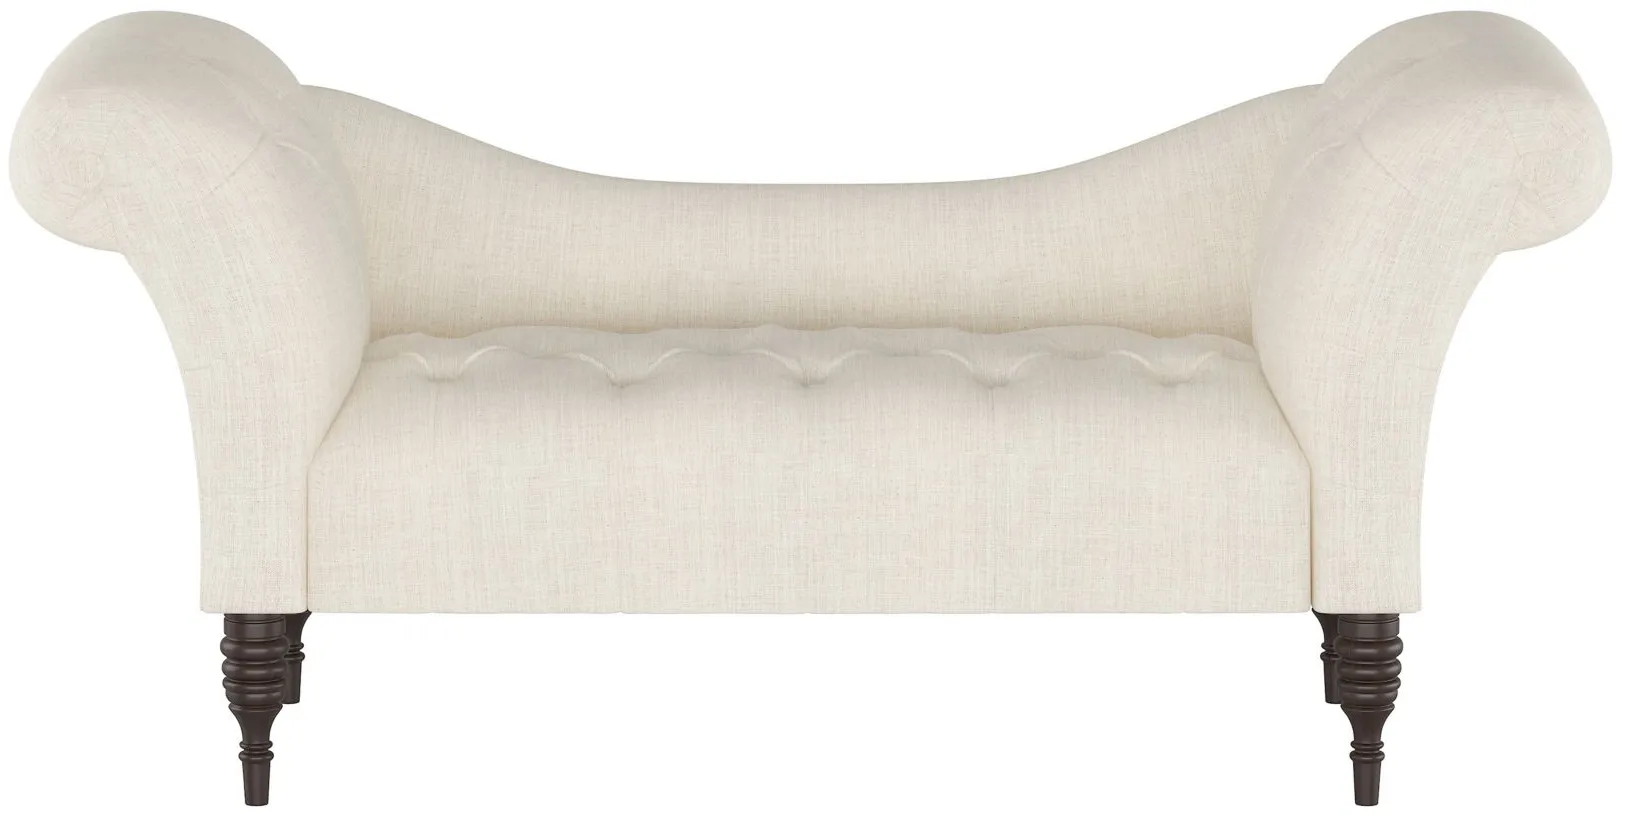 Lansing Chaise Lounge in Linen Talc by Skyline